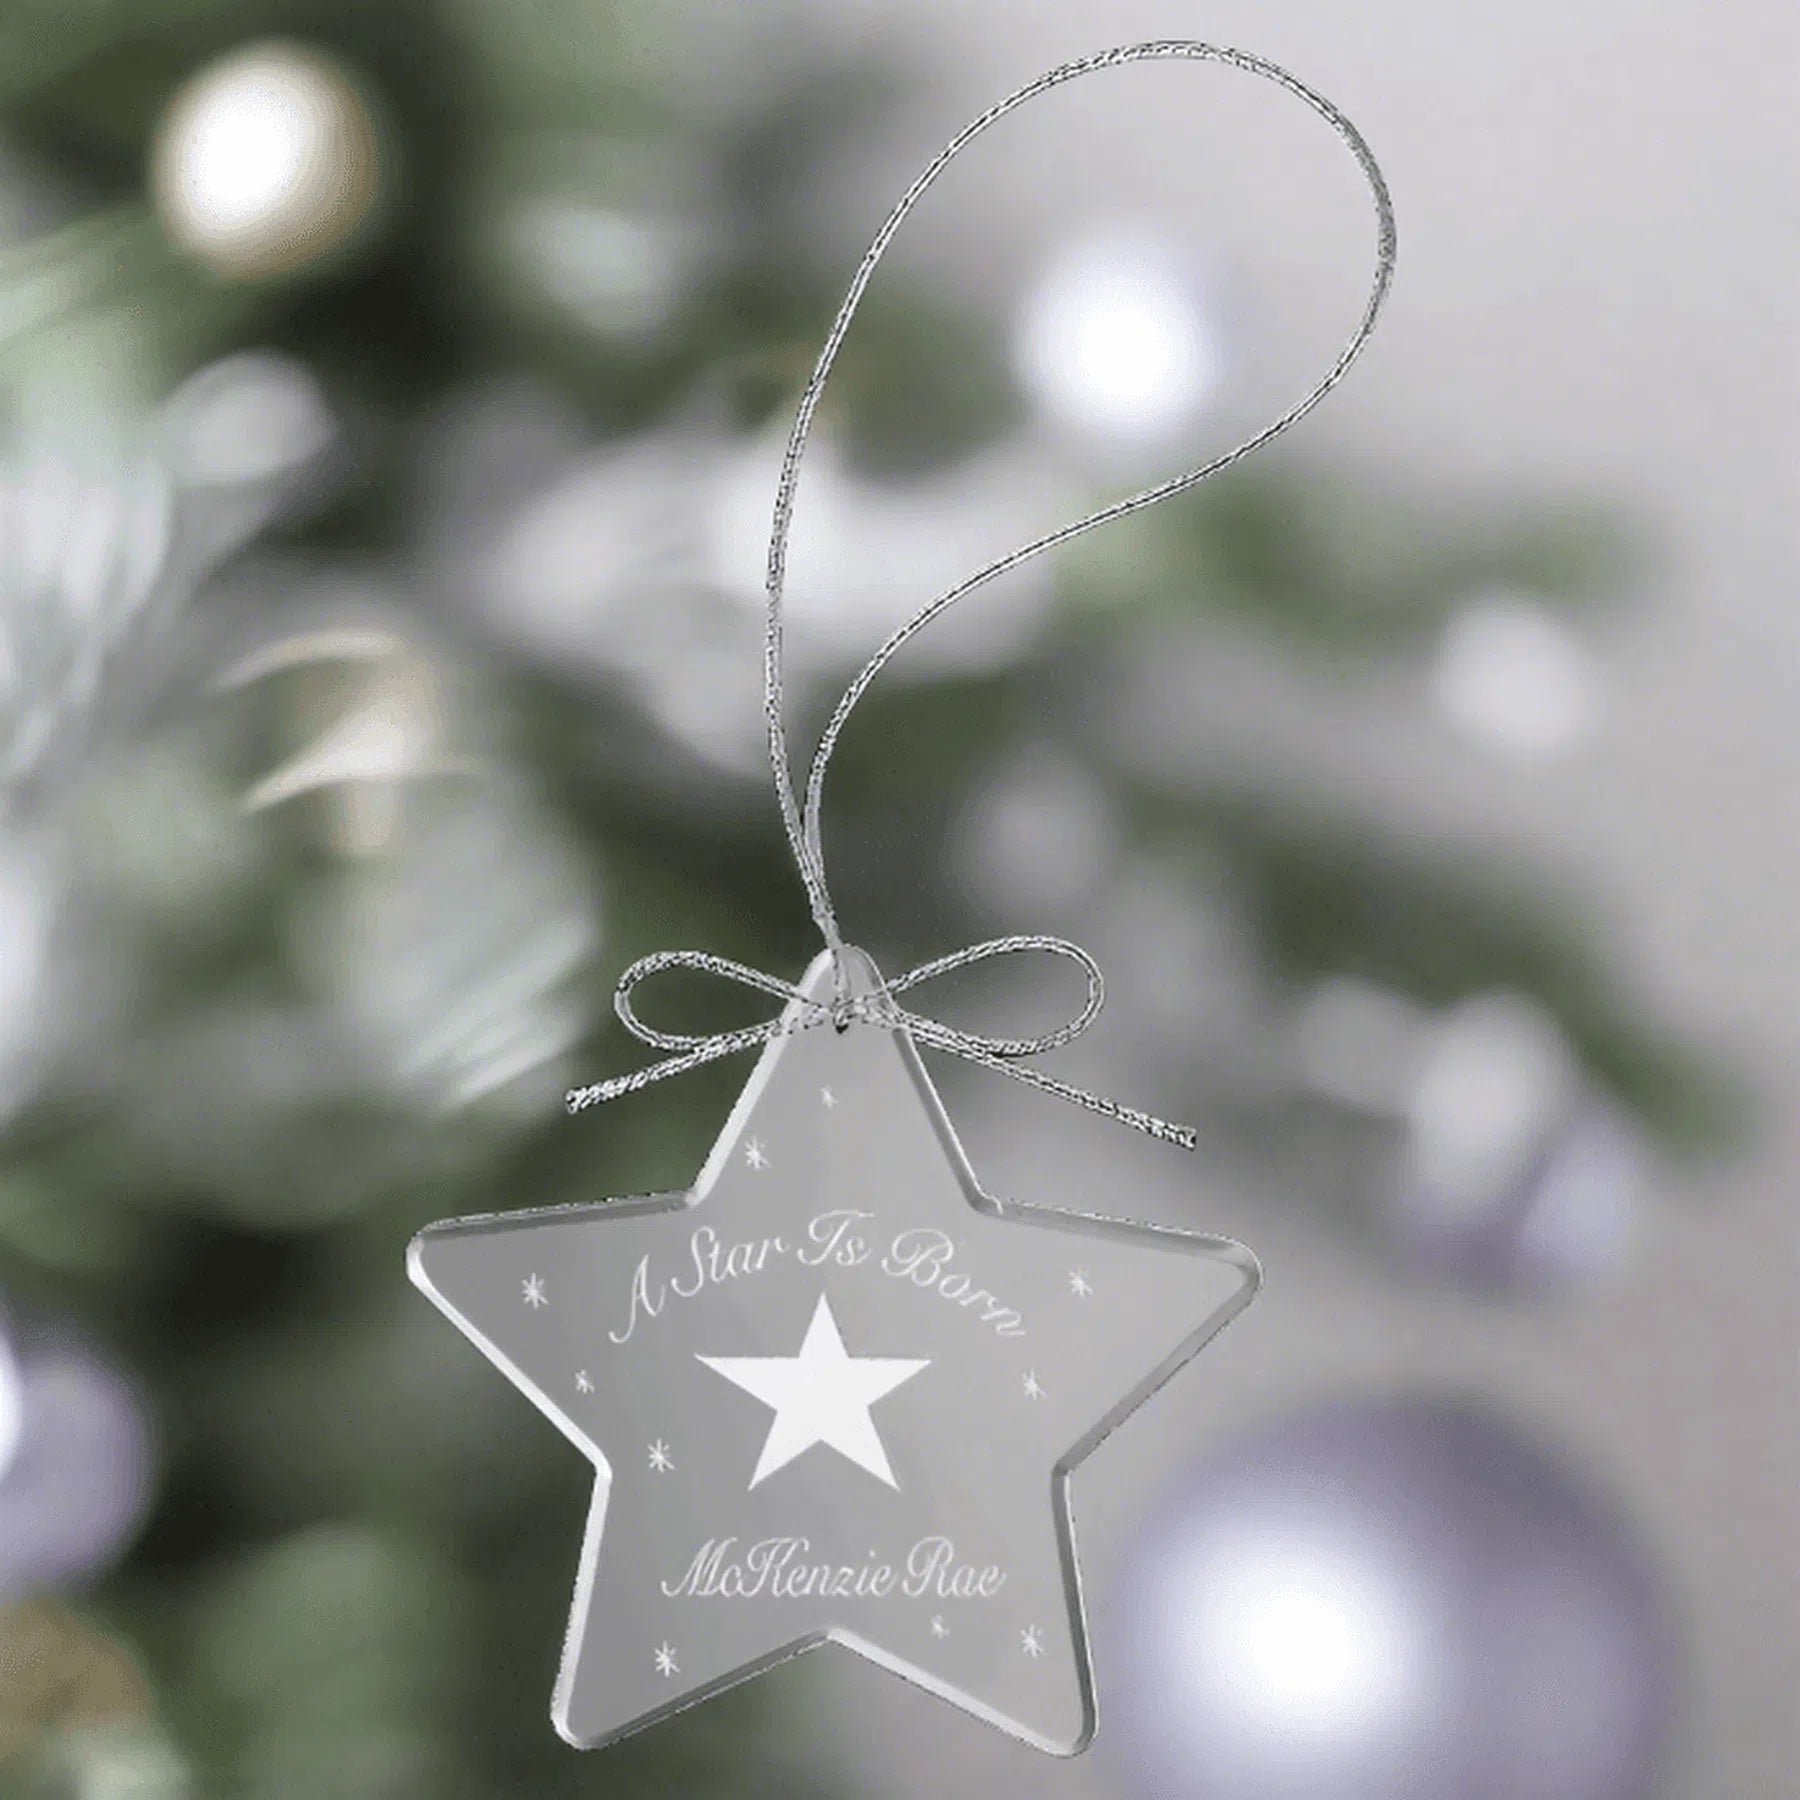 3" Crystal Star Ornament with Silver String